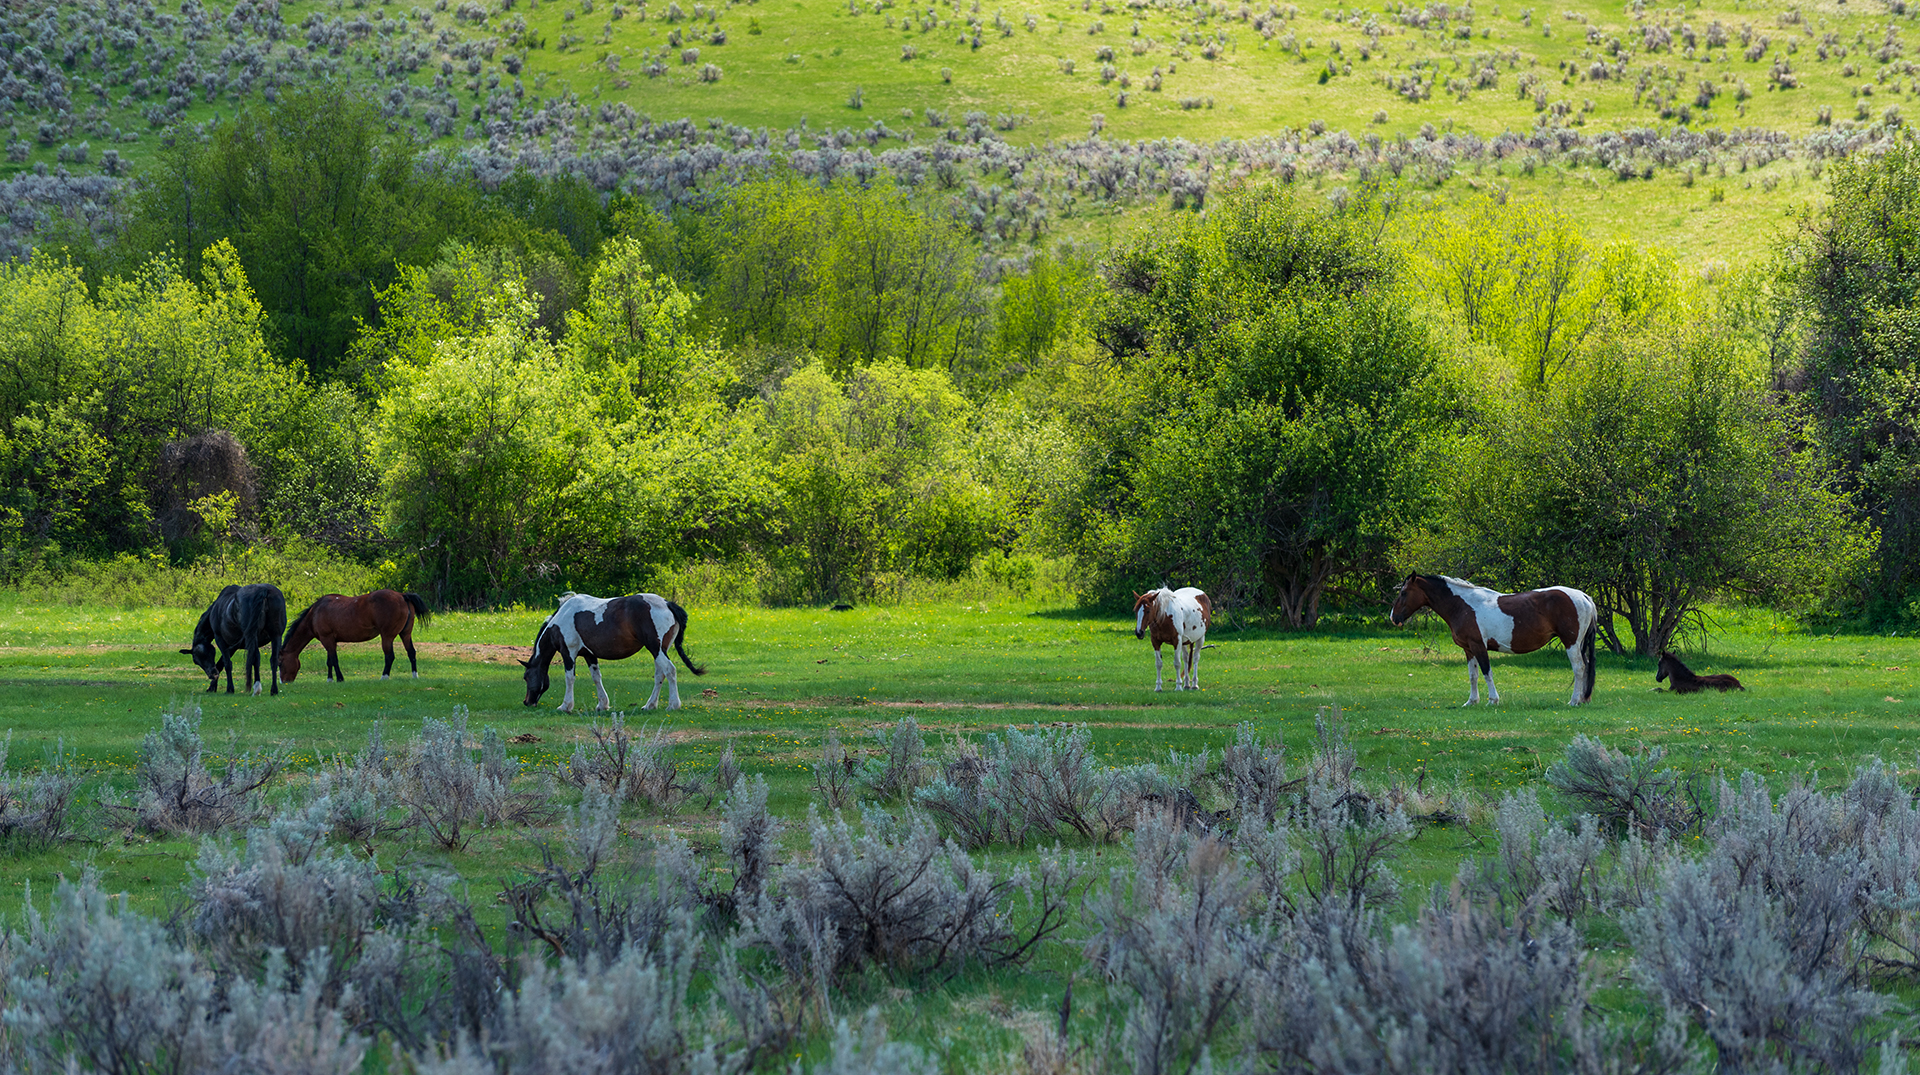 Kamloops rural life horses grazing in a field with plants and big trees